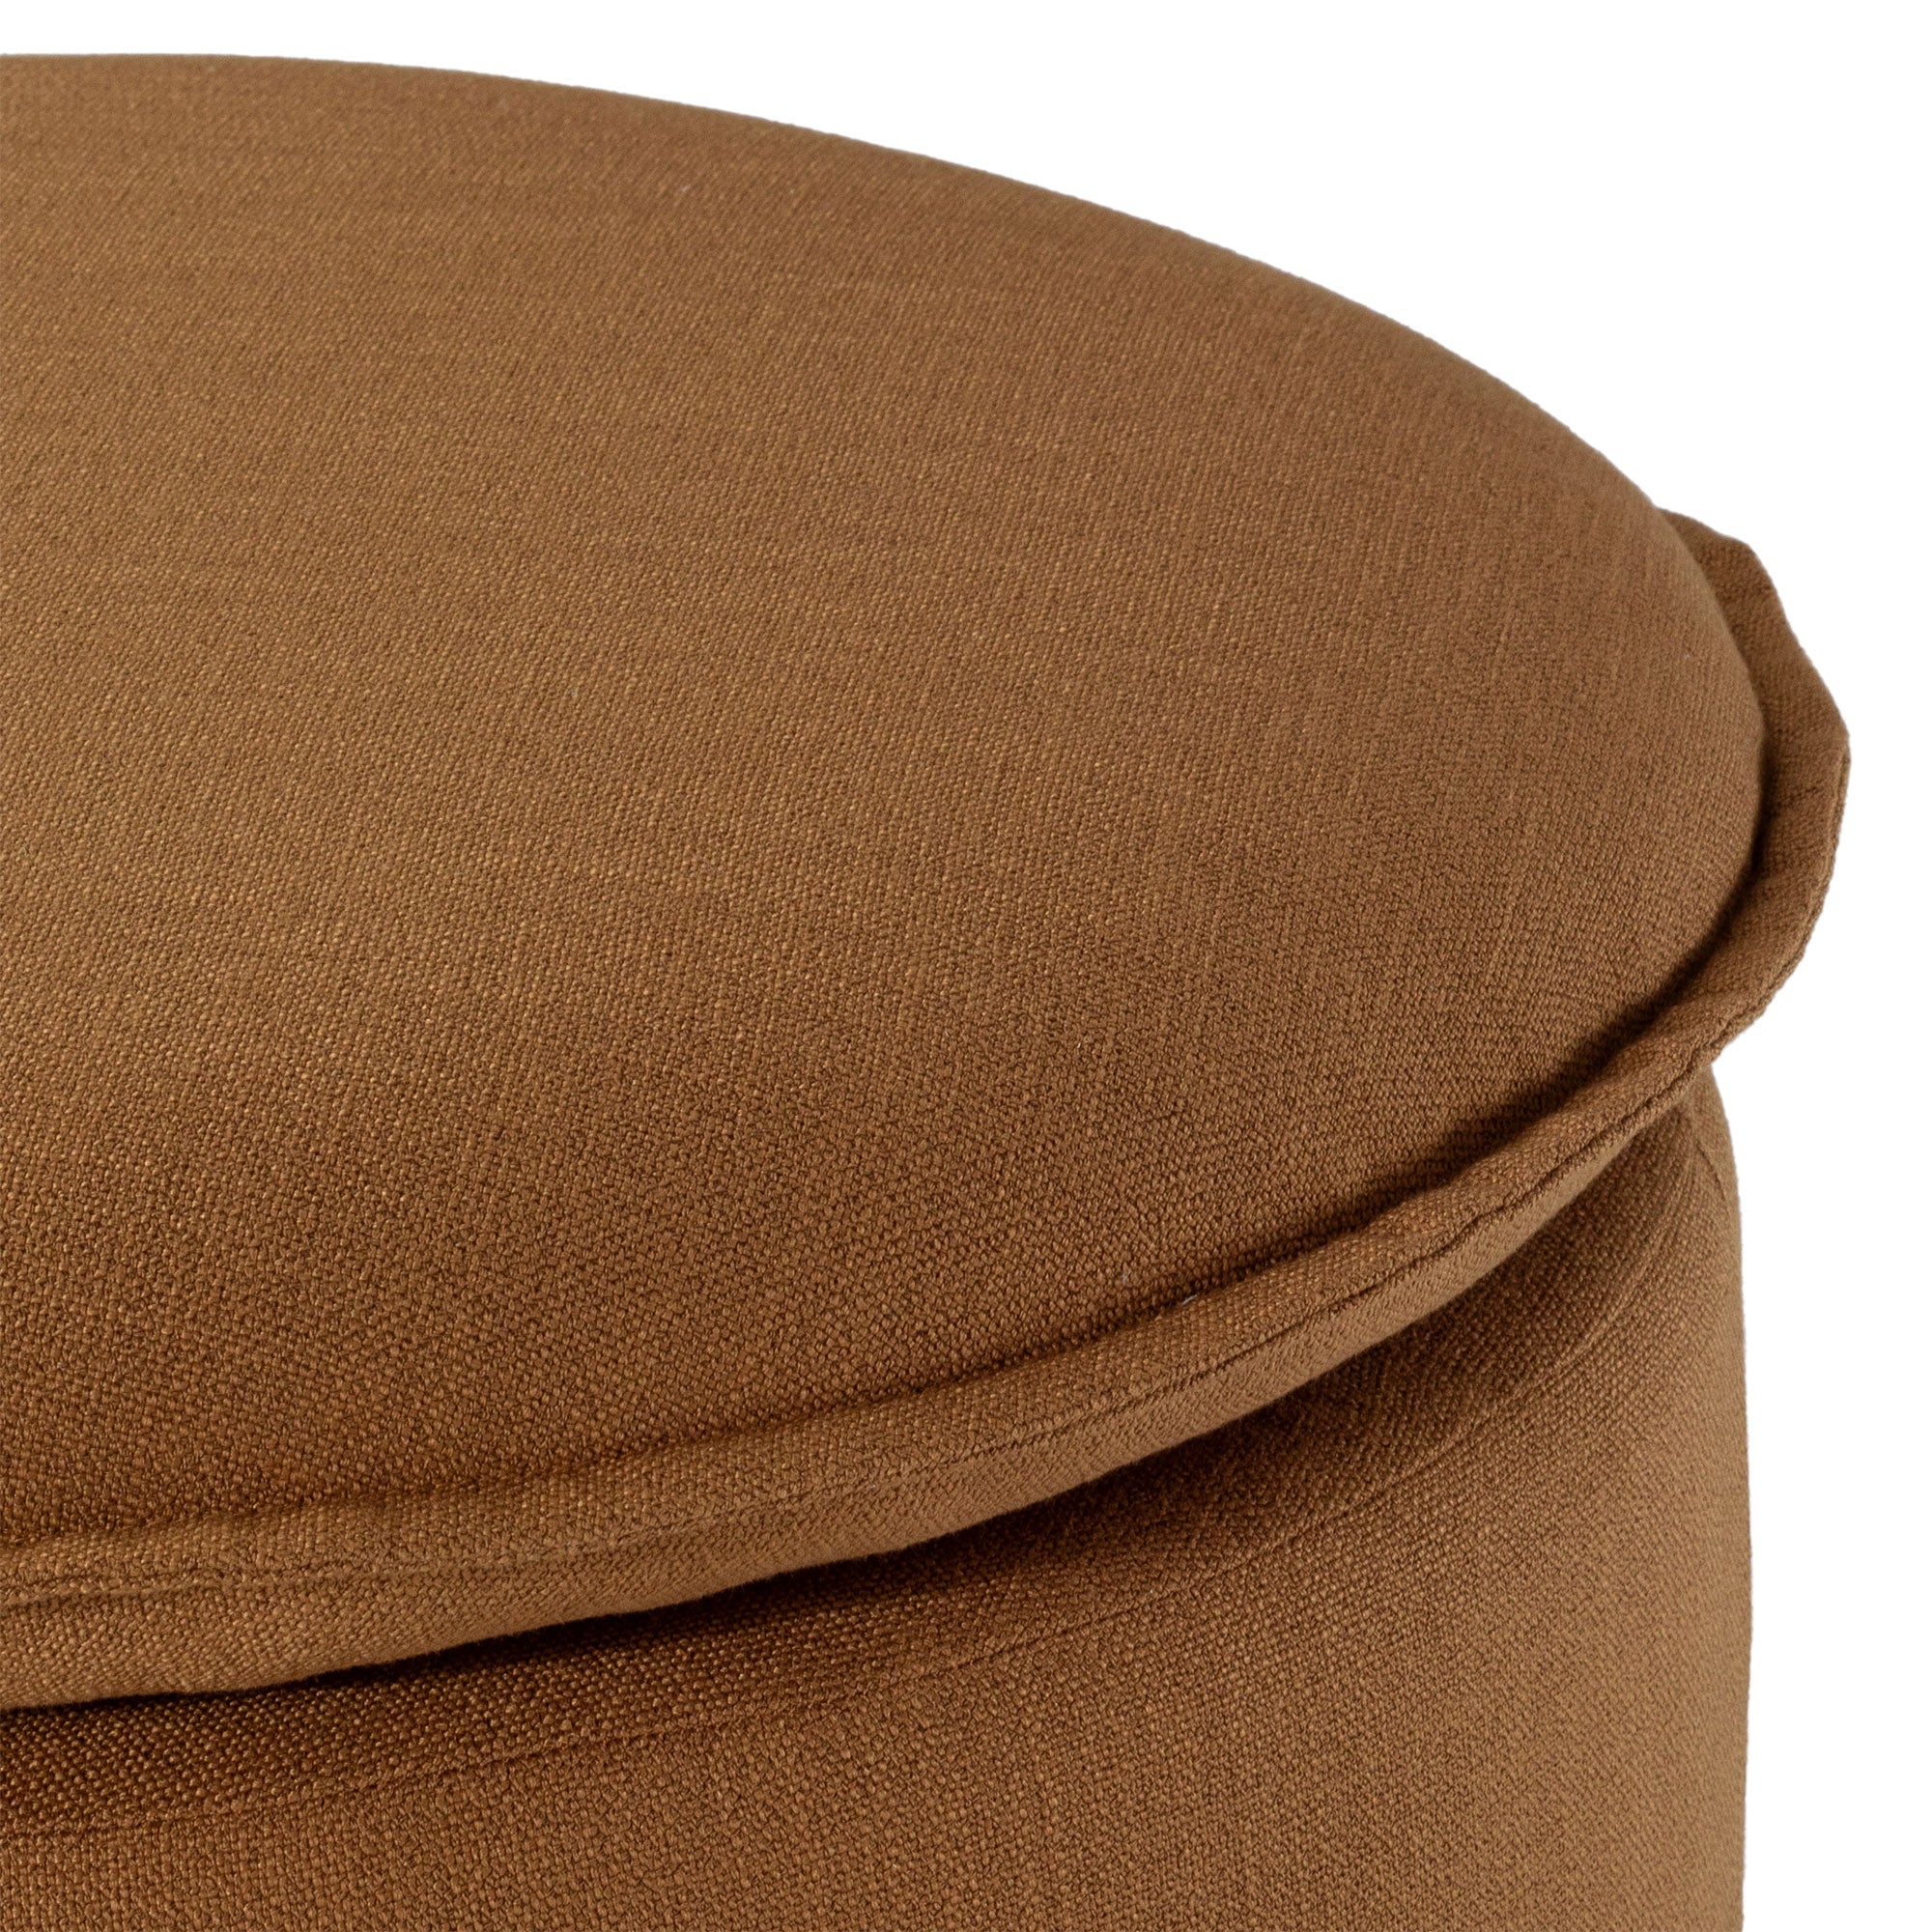 Lyra Organic Ottoman in Clay Fabric Upholstery in Ottomans & Benches by Maven Lane